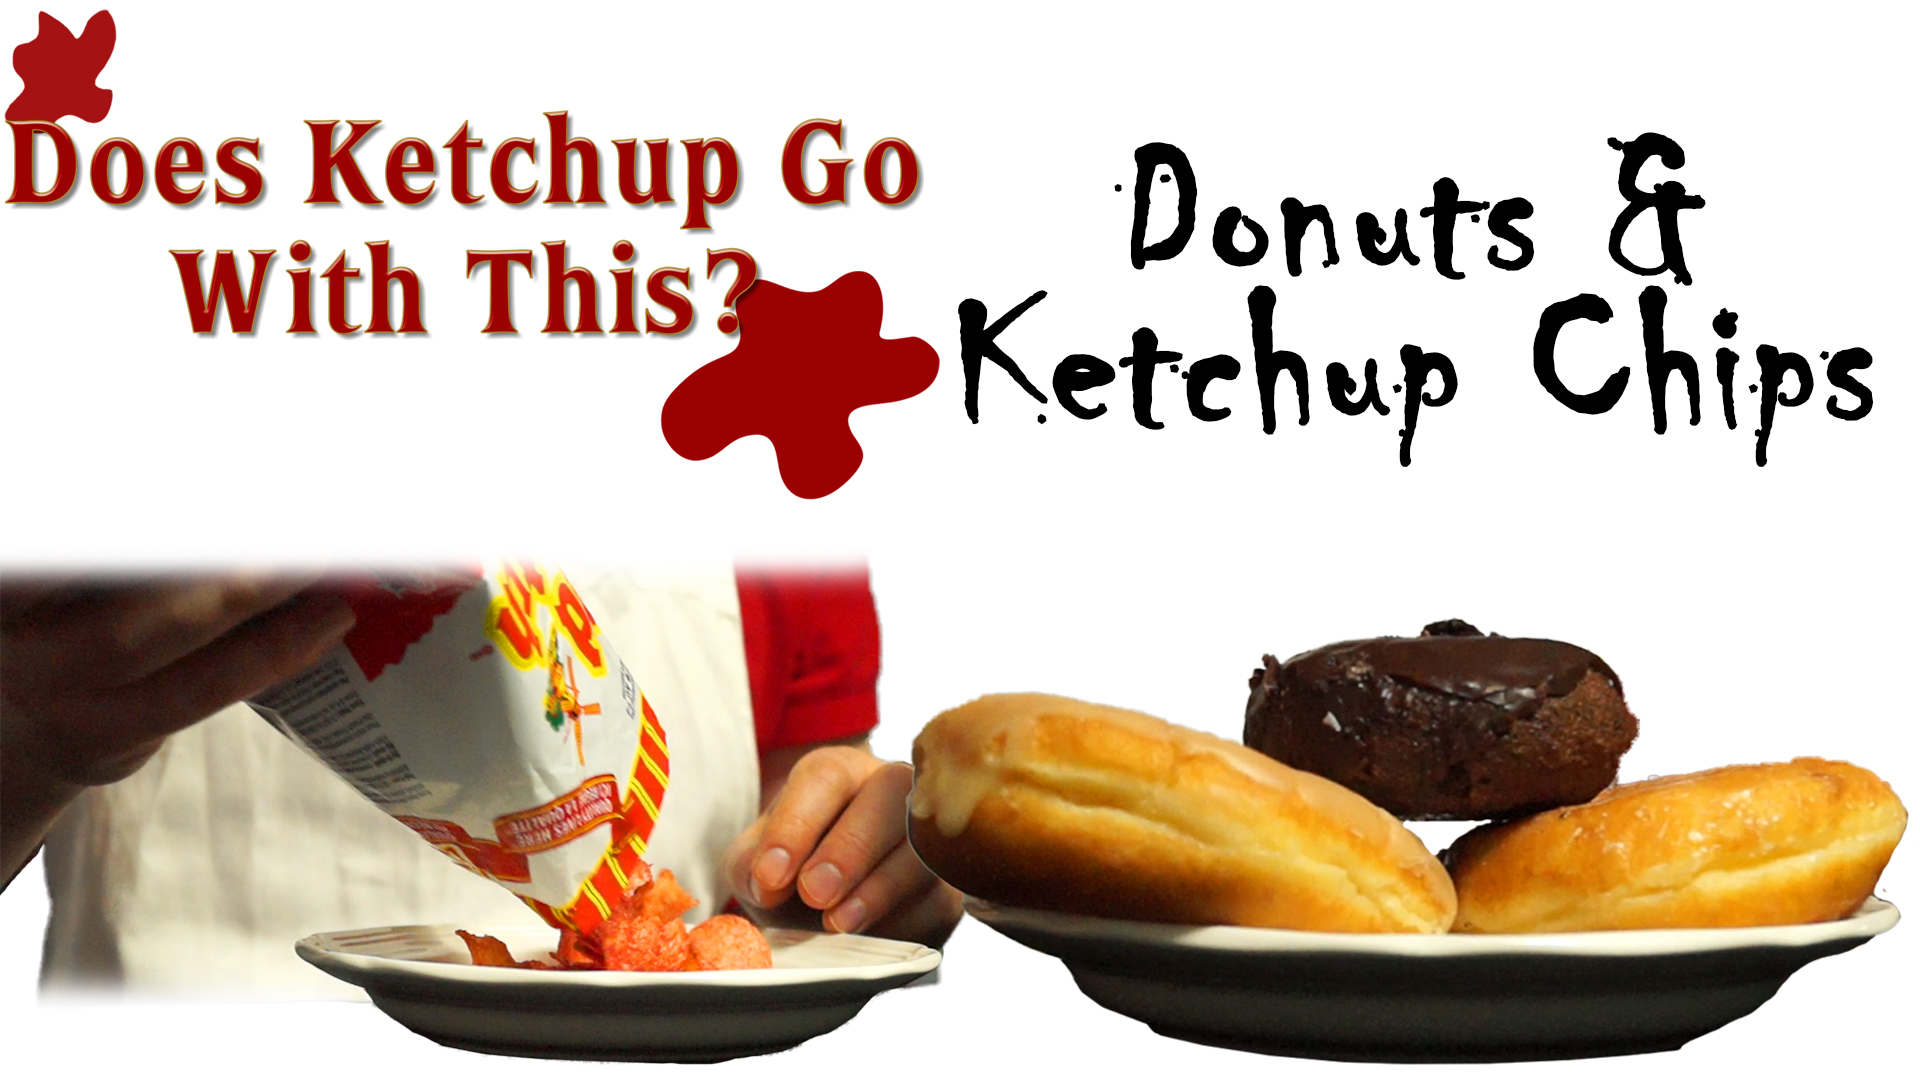 Donuts & Ketchup Chips - Does Ketchup Go With This? by Zack Lawrence #10yearsofstandingsun